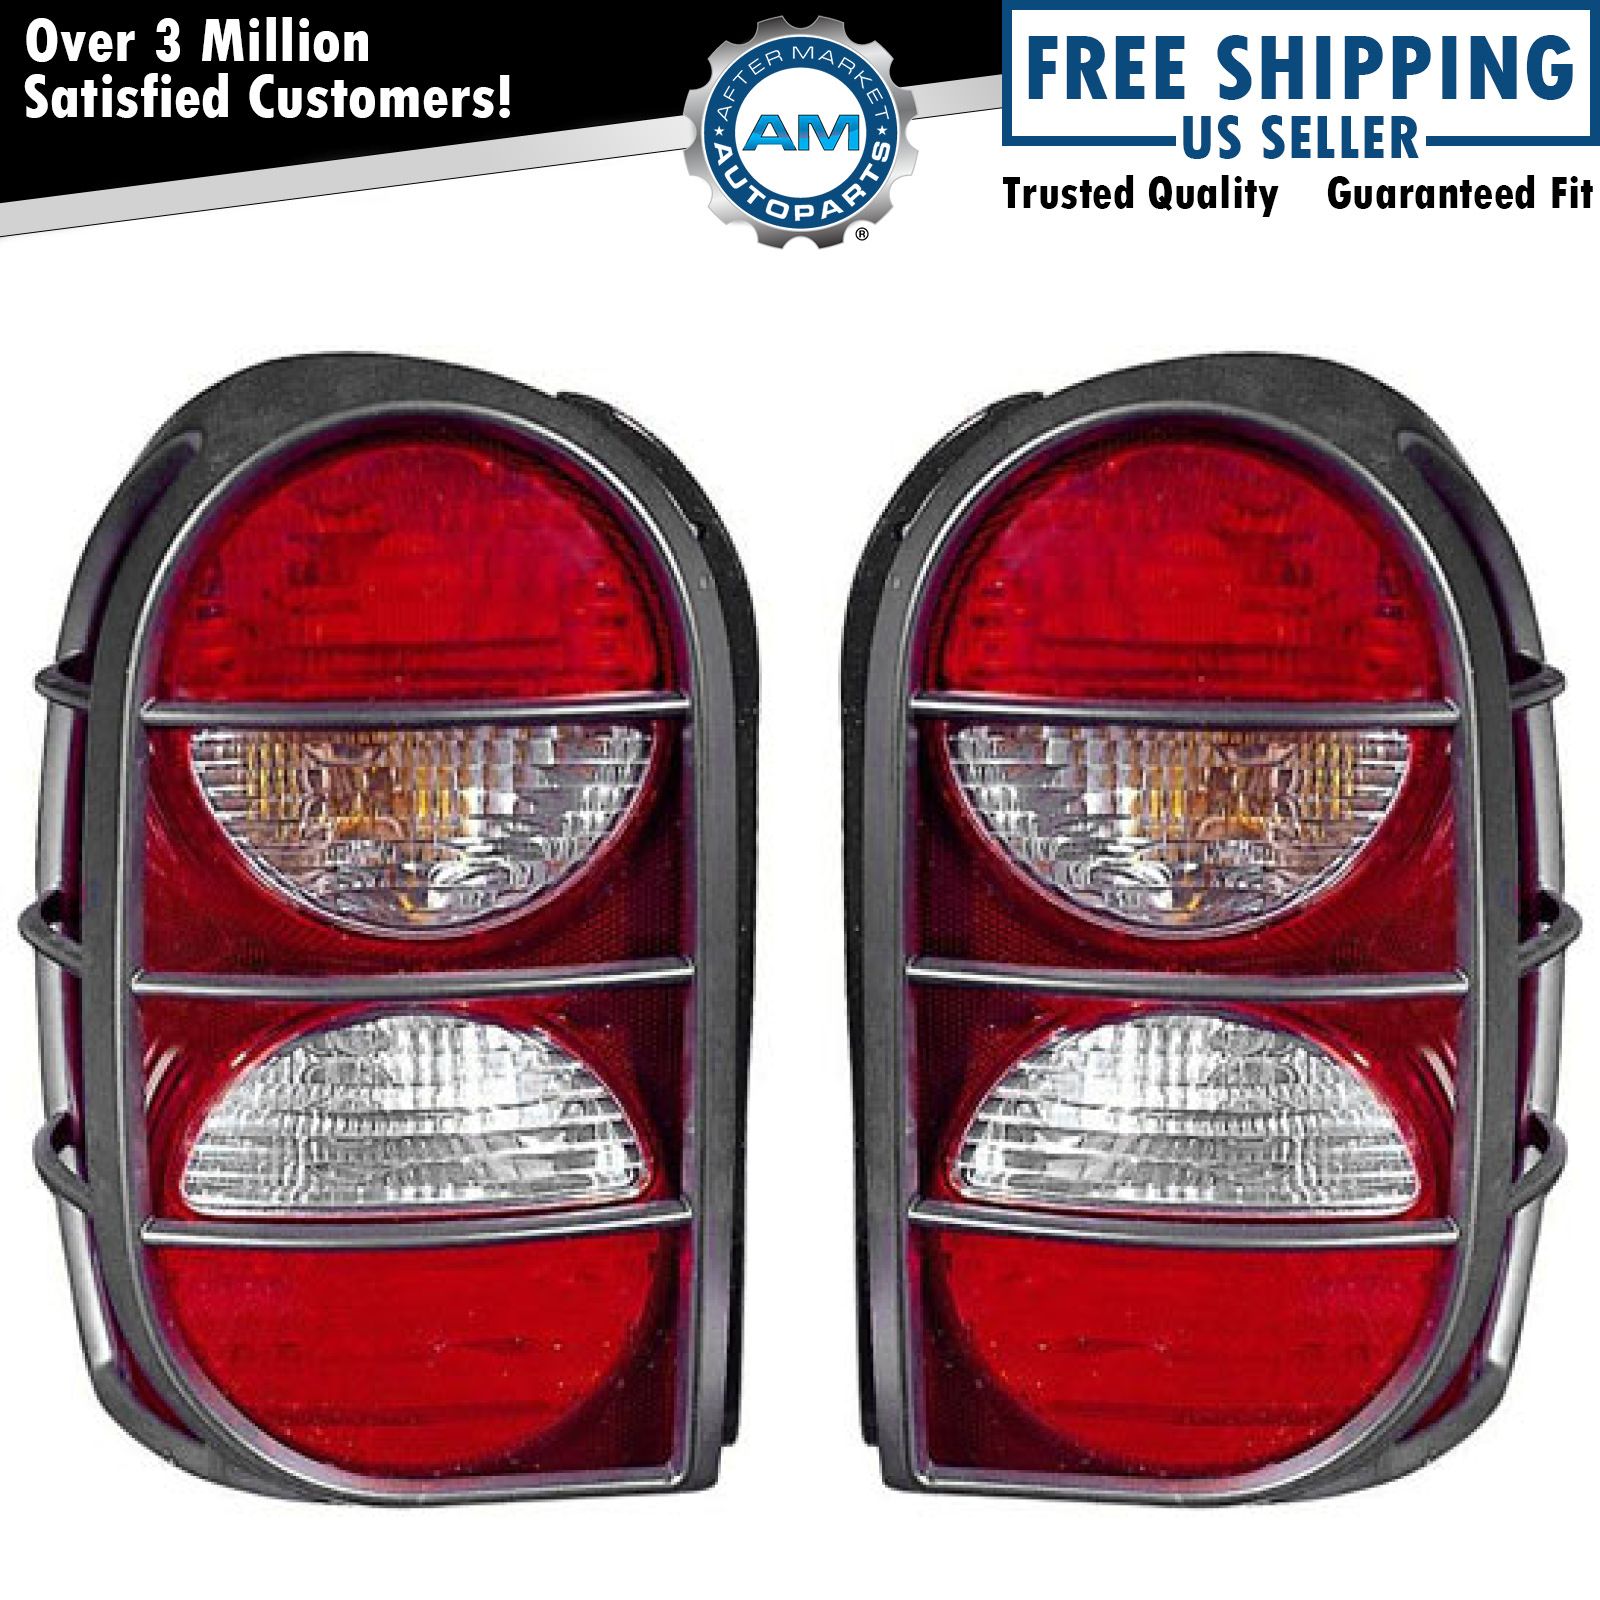 Taillight Tail Lamp & Guard PAIR for Jeep Liberty 05 06 07